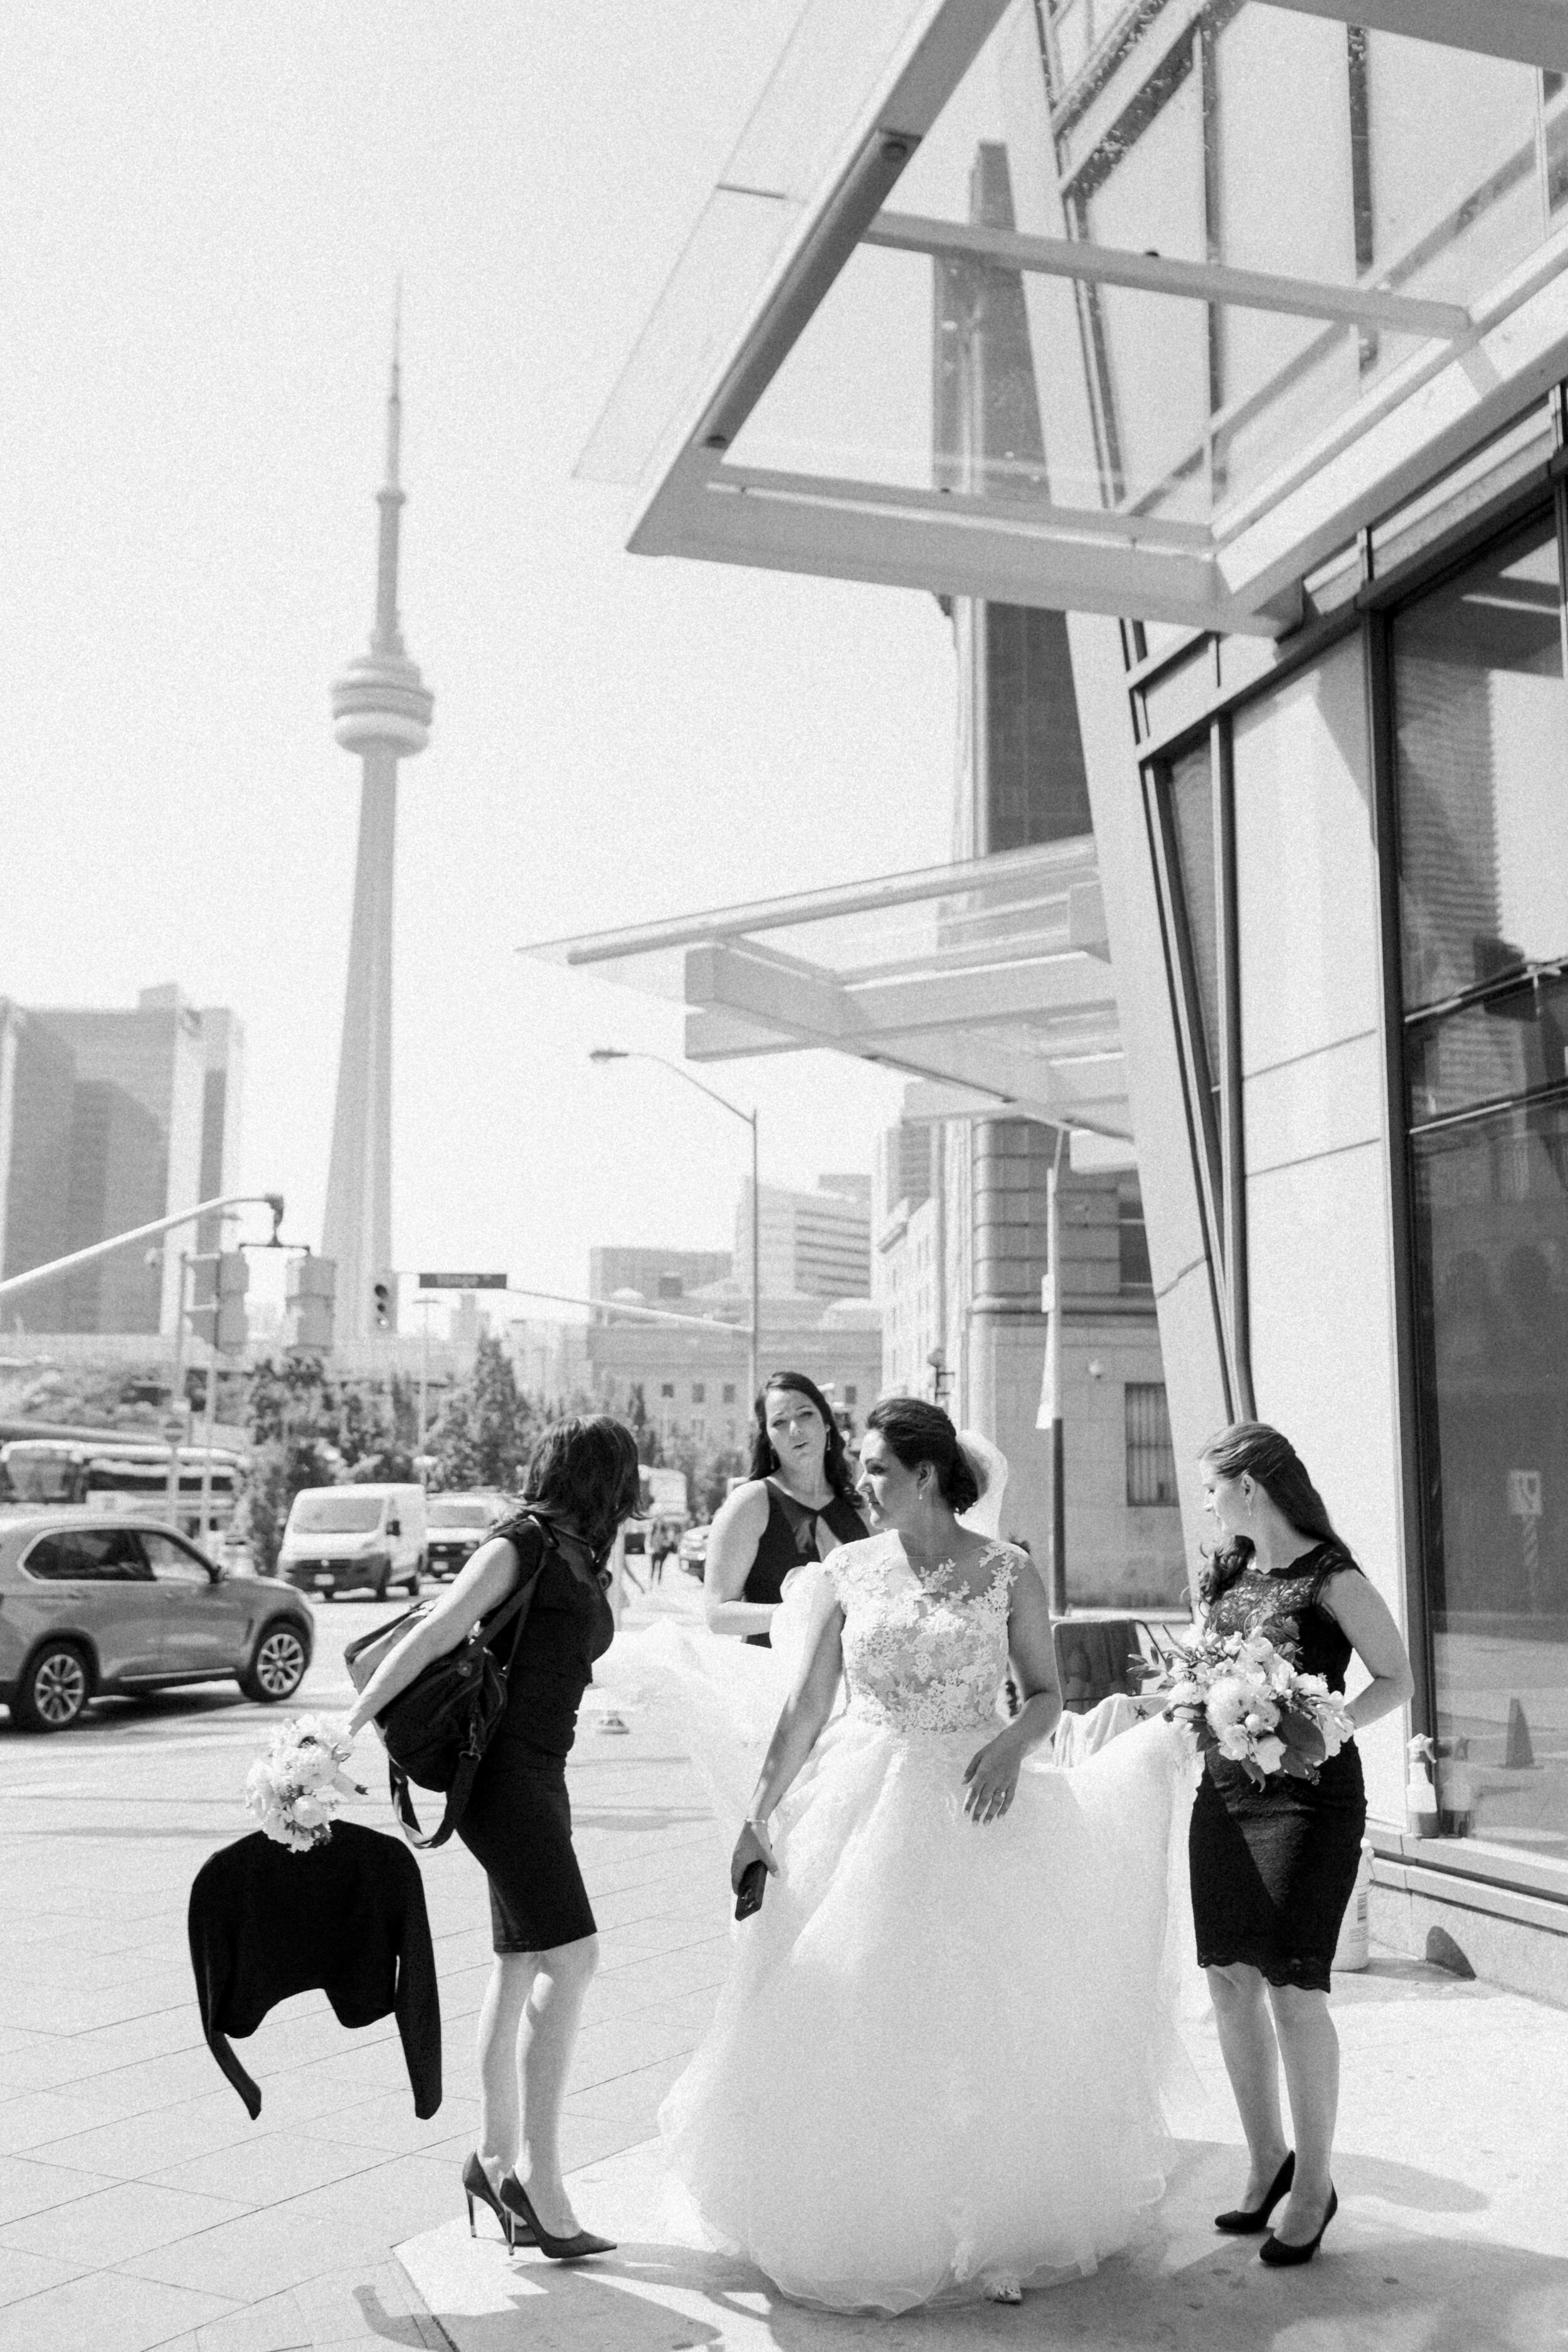 A woman in a wedding dress is seen walking in the streets of Toronto with the CN Tower in the background. 